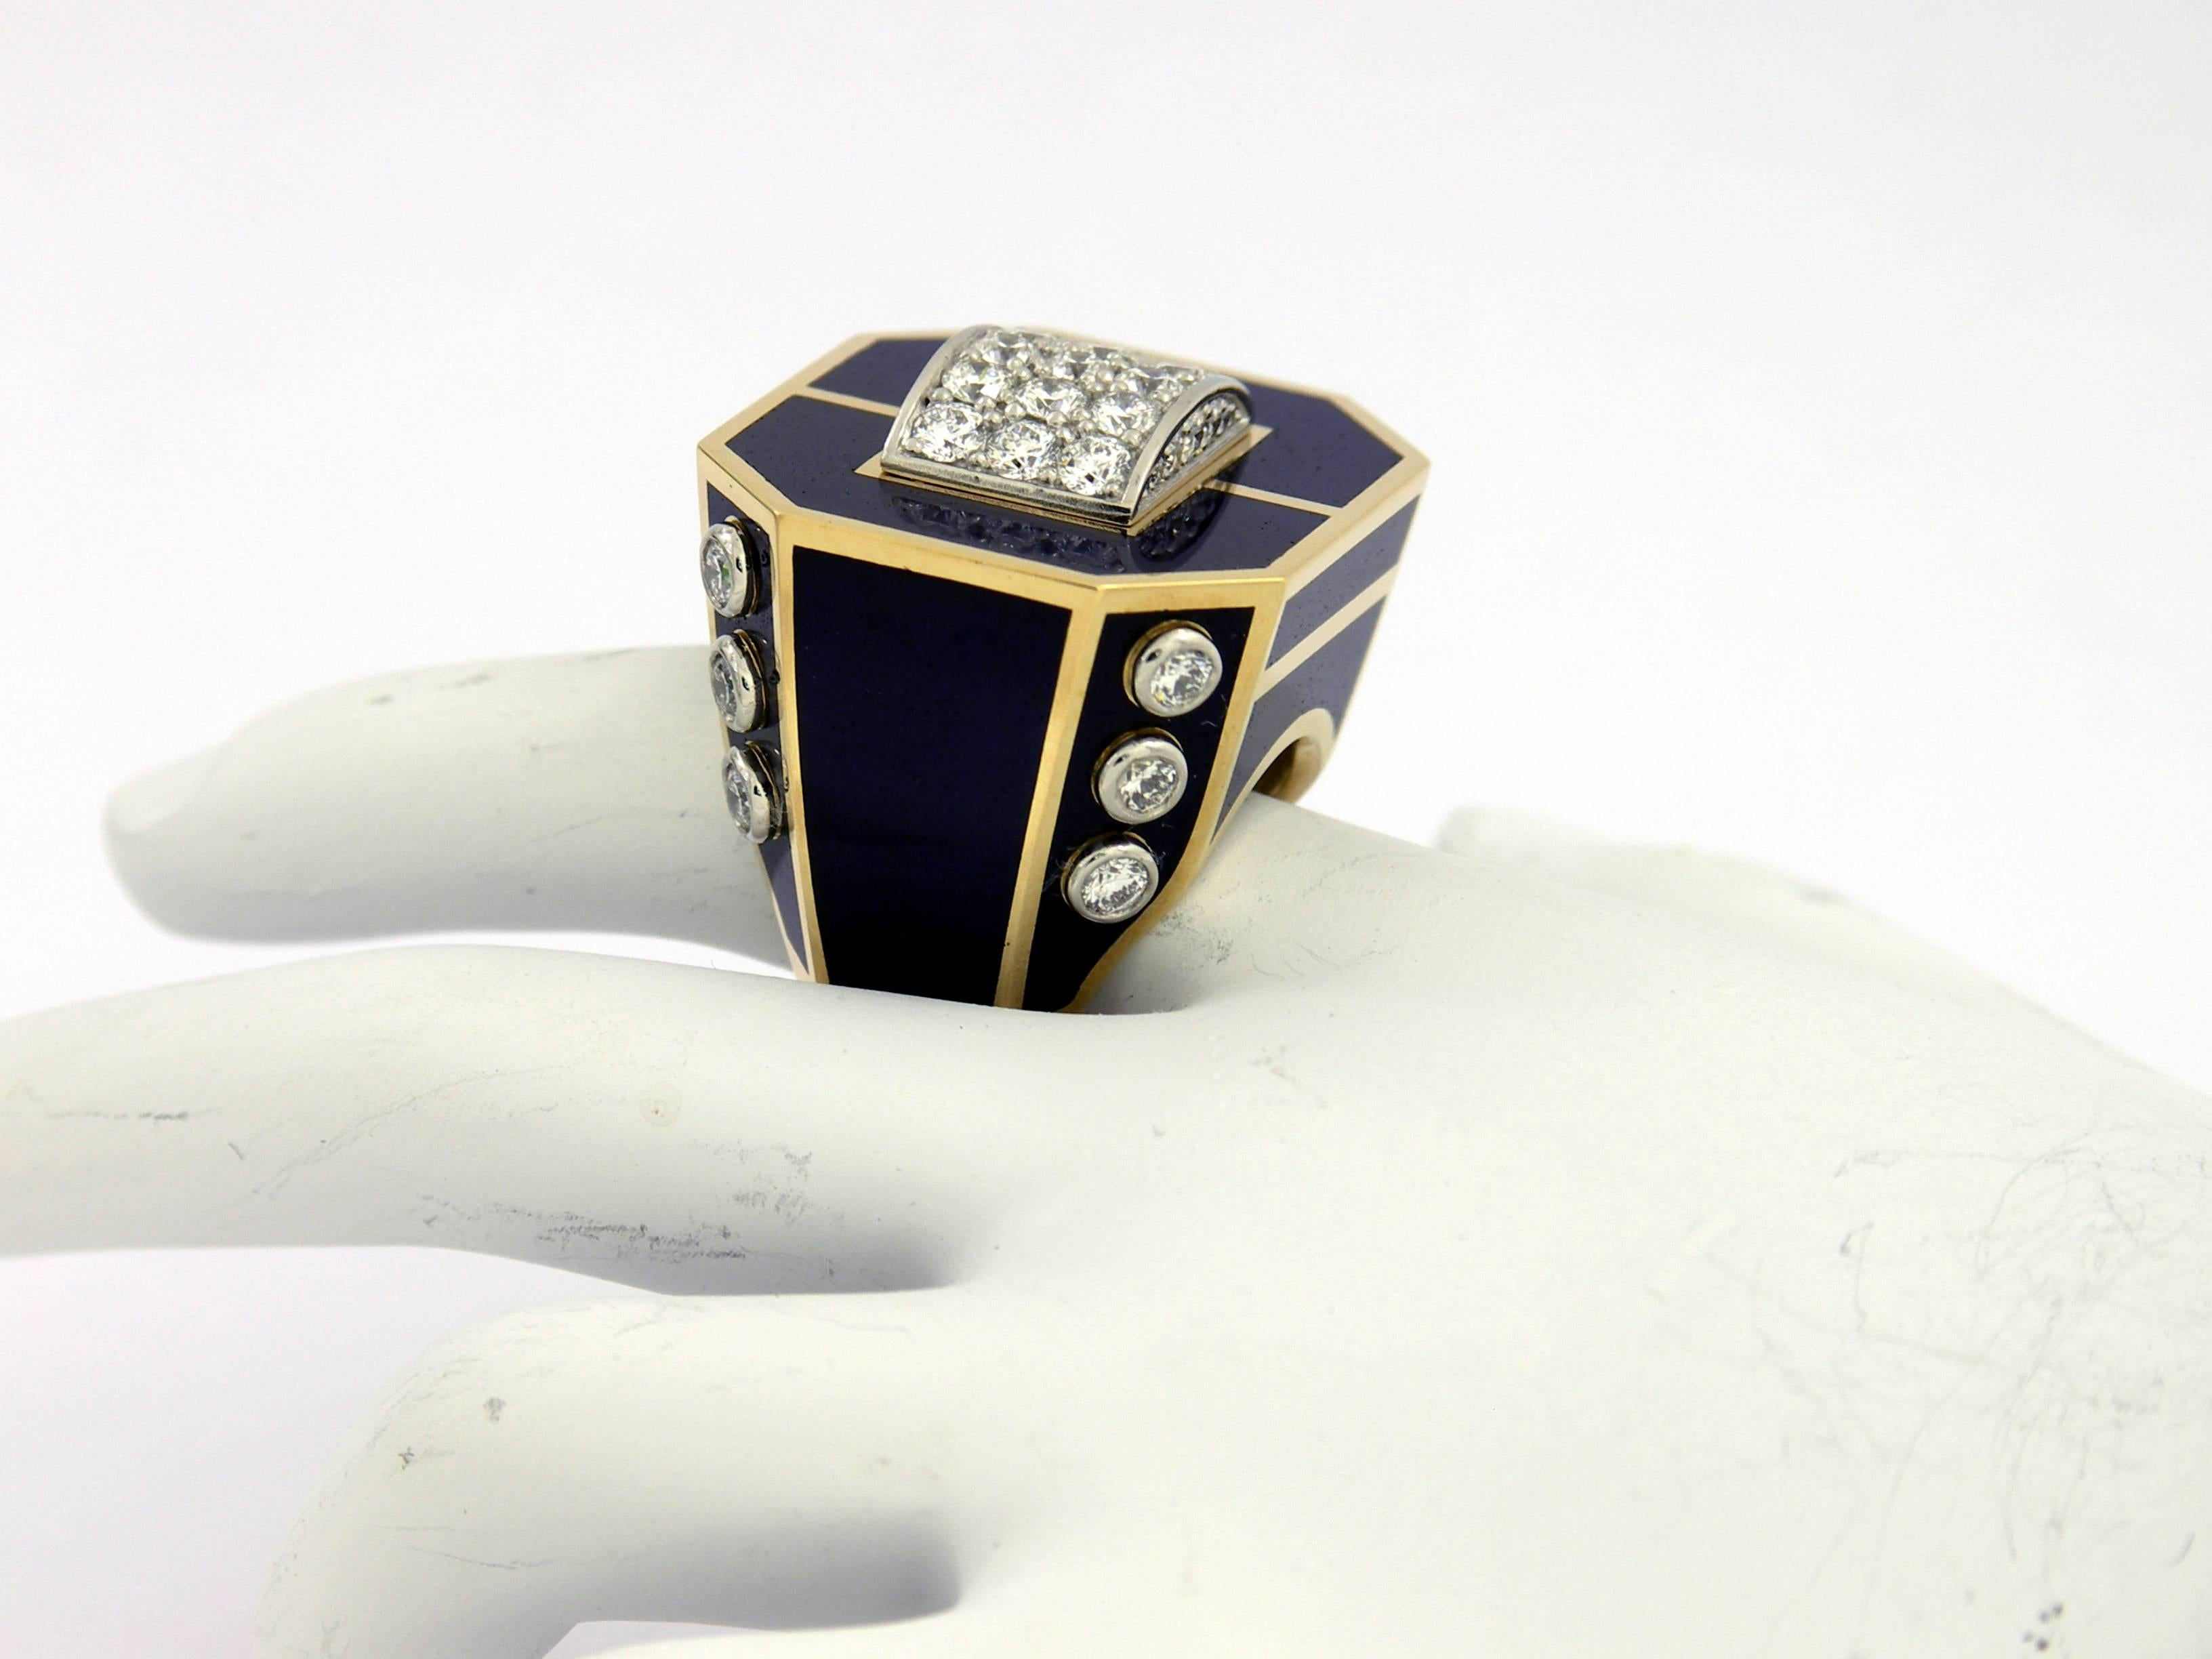 A grand ring in 18K yellow gold, and platinum, incorporating both pave' set as well as bezel set diamonds. With a design area of 1 inch long, and 1 1/8 inches wide, it features a geometric outline. Accenting the ring are 12 cells of cobalt blue